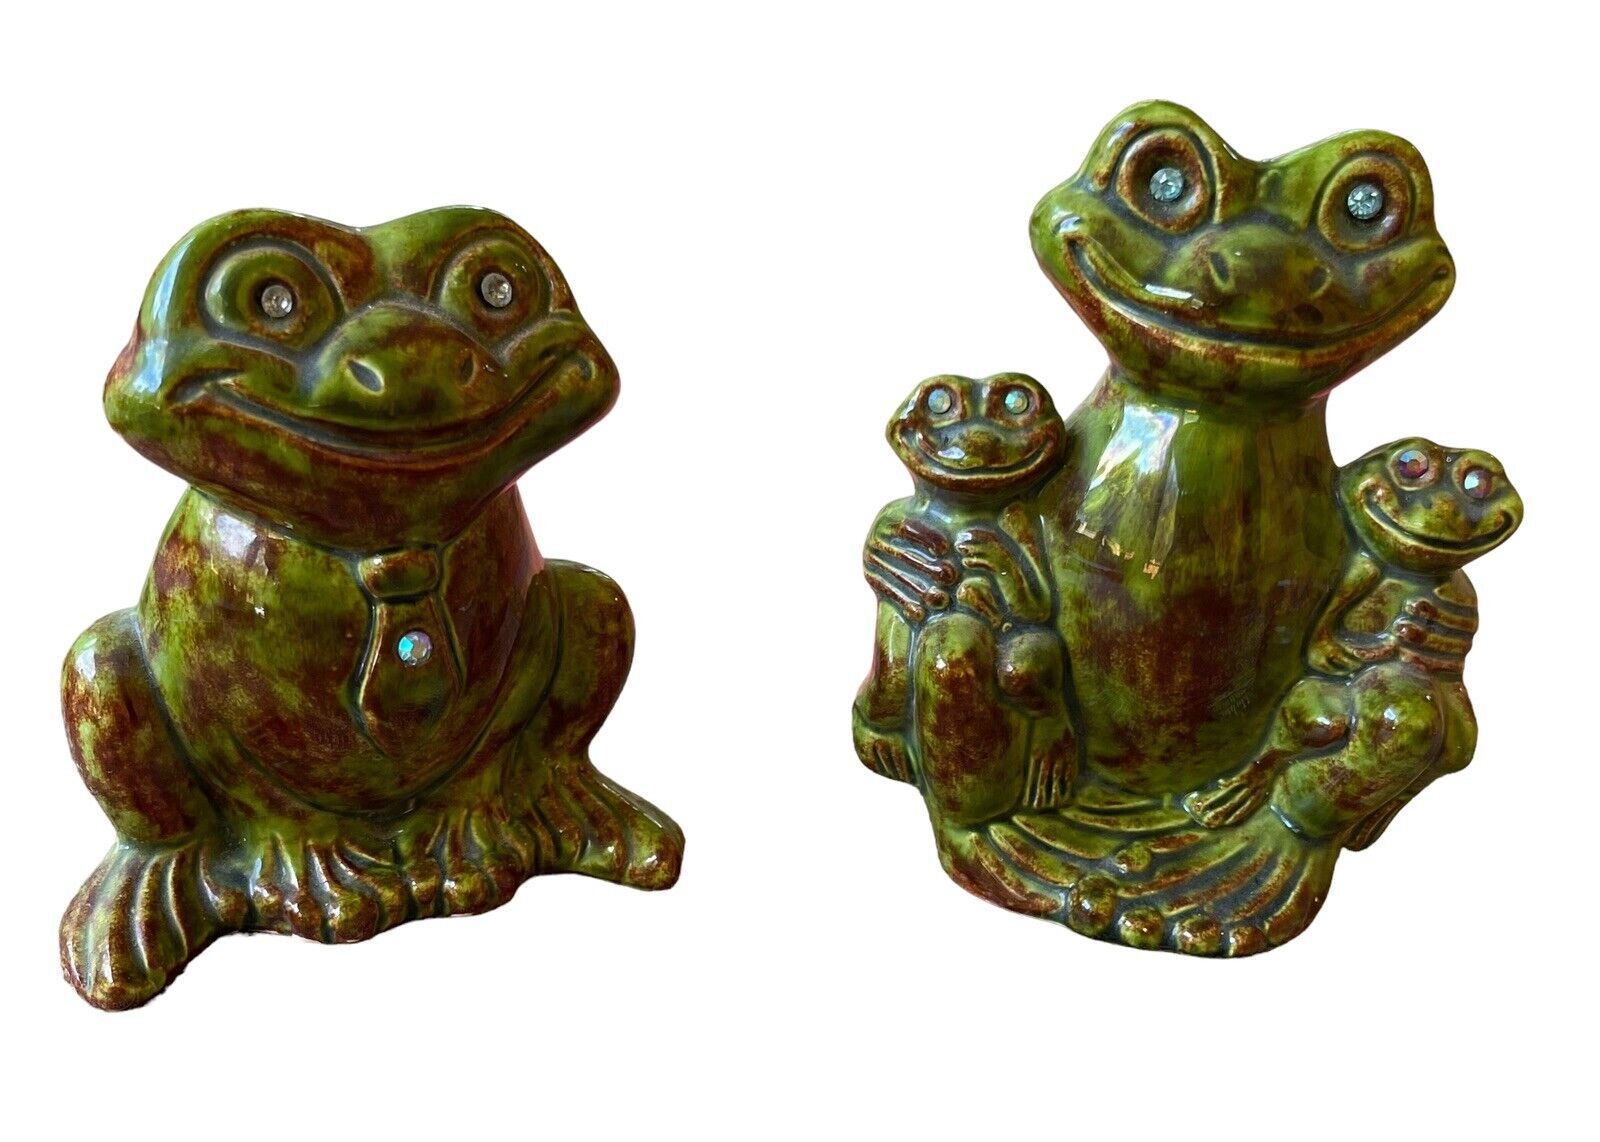 Cute Vintage Ceramic Frog Family Set - Mom, Dad And Two Froggie Kids